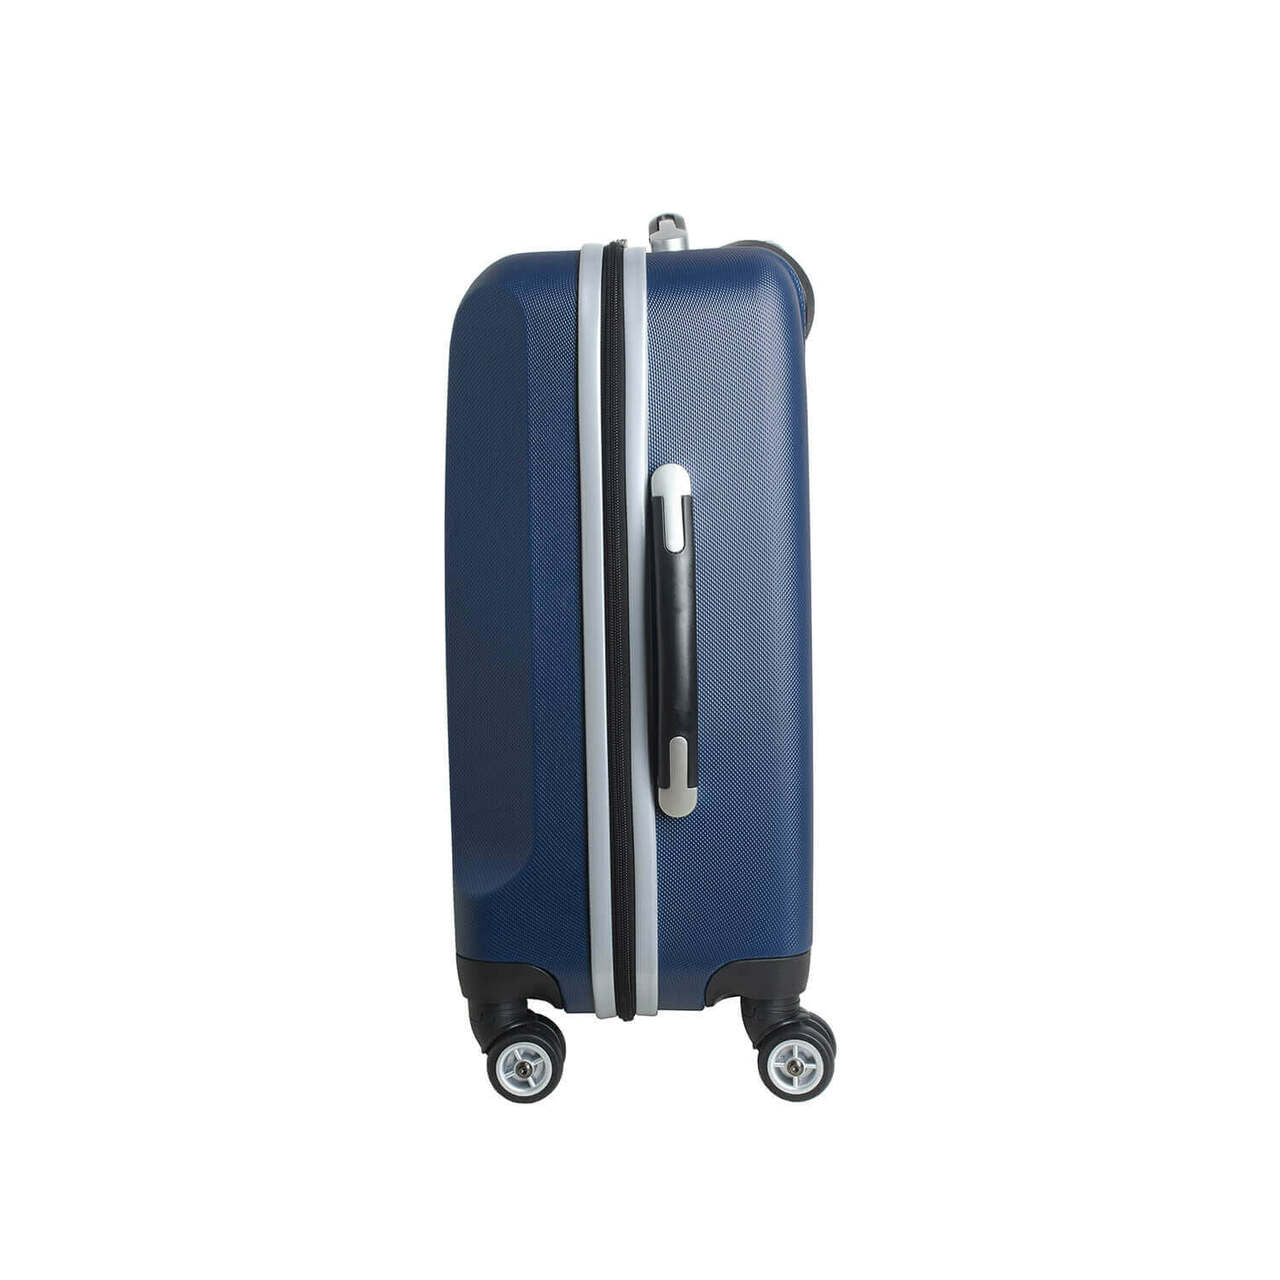 Personalized Initial Name letter "R" 20 inches Carry on Hardcase Spinner Luggage by Mojo in NAVY